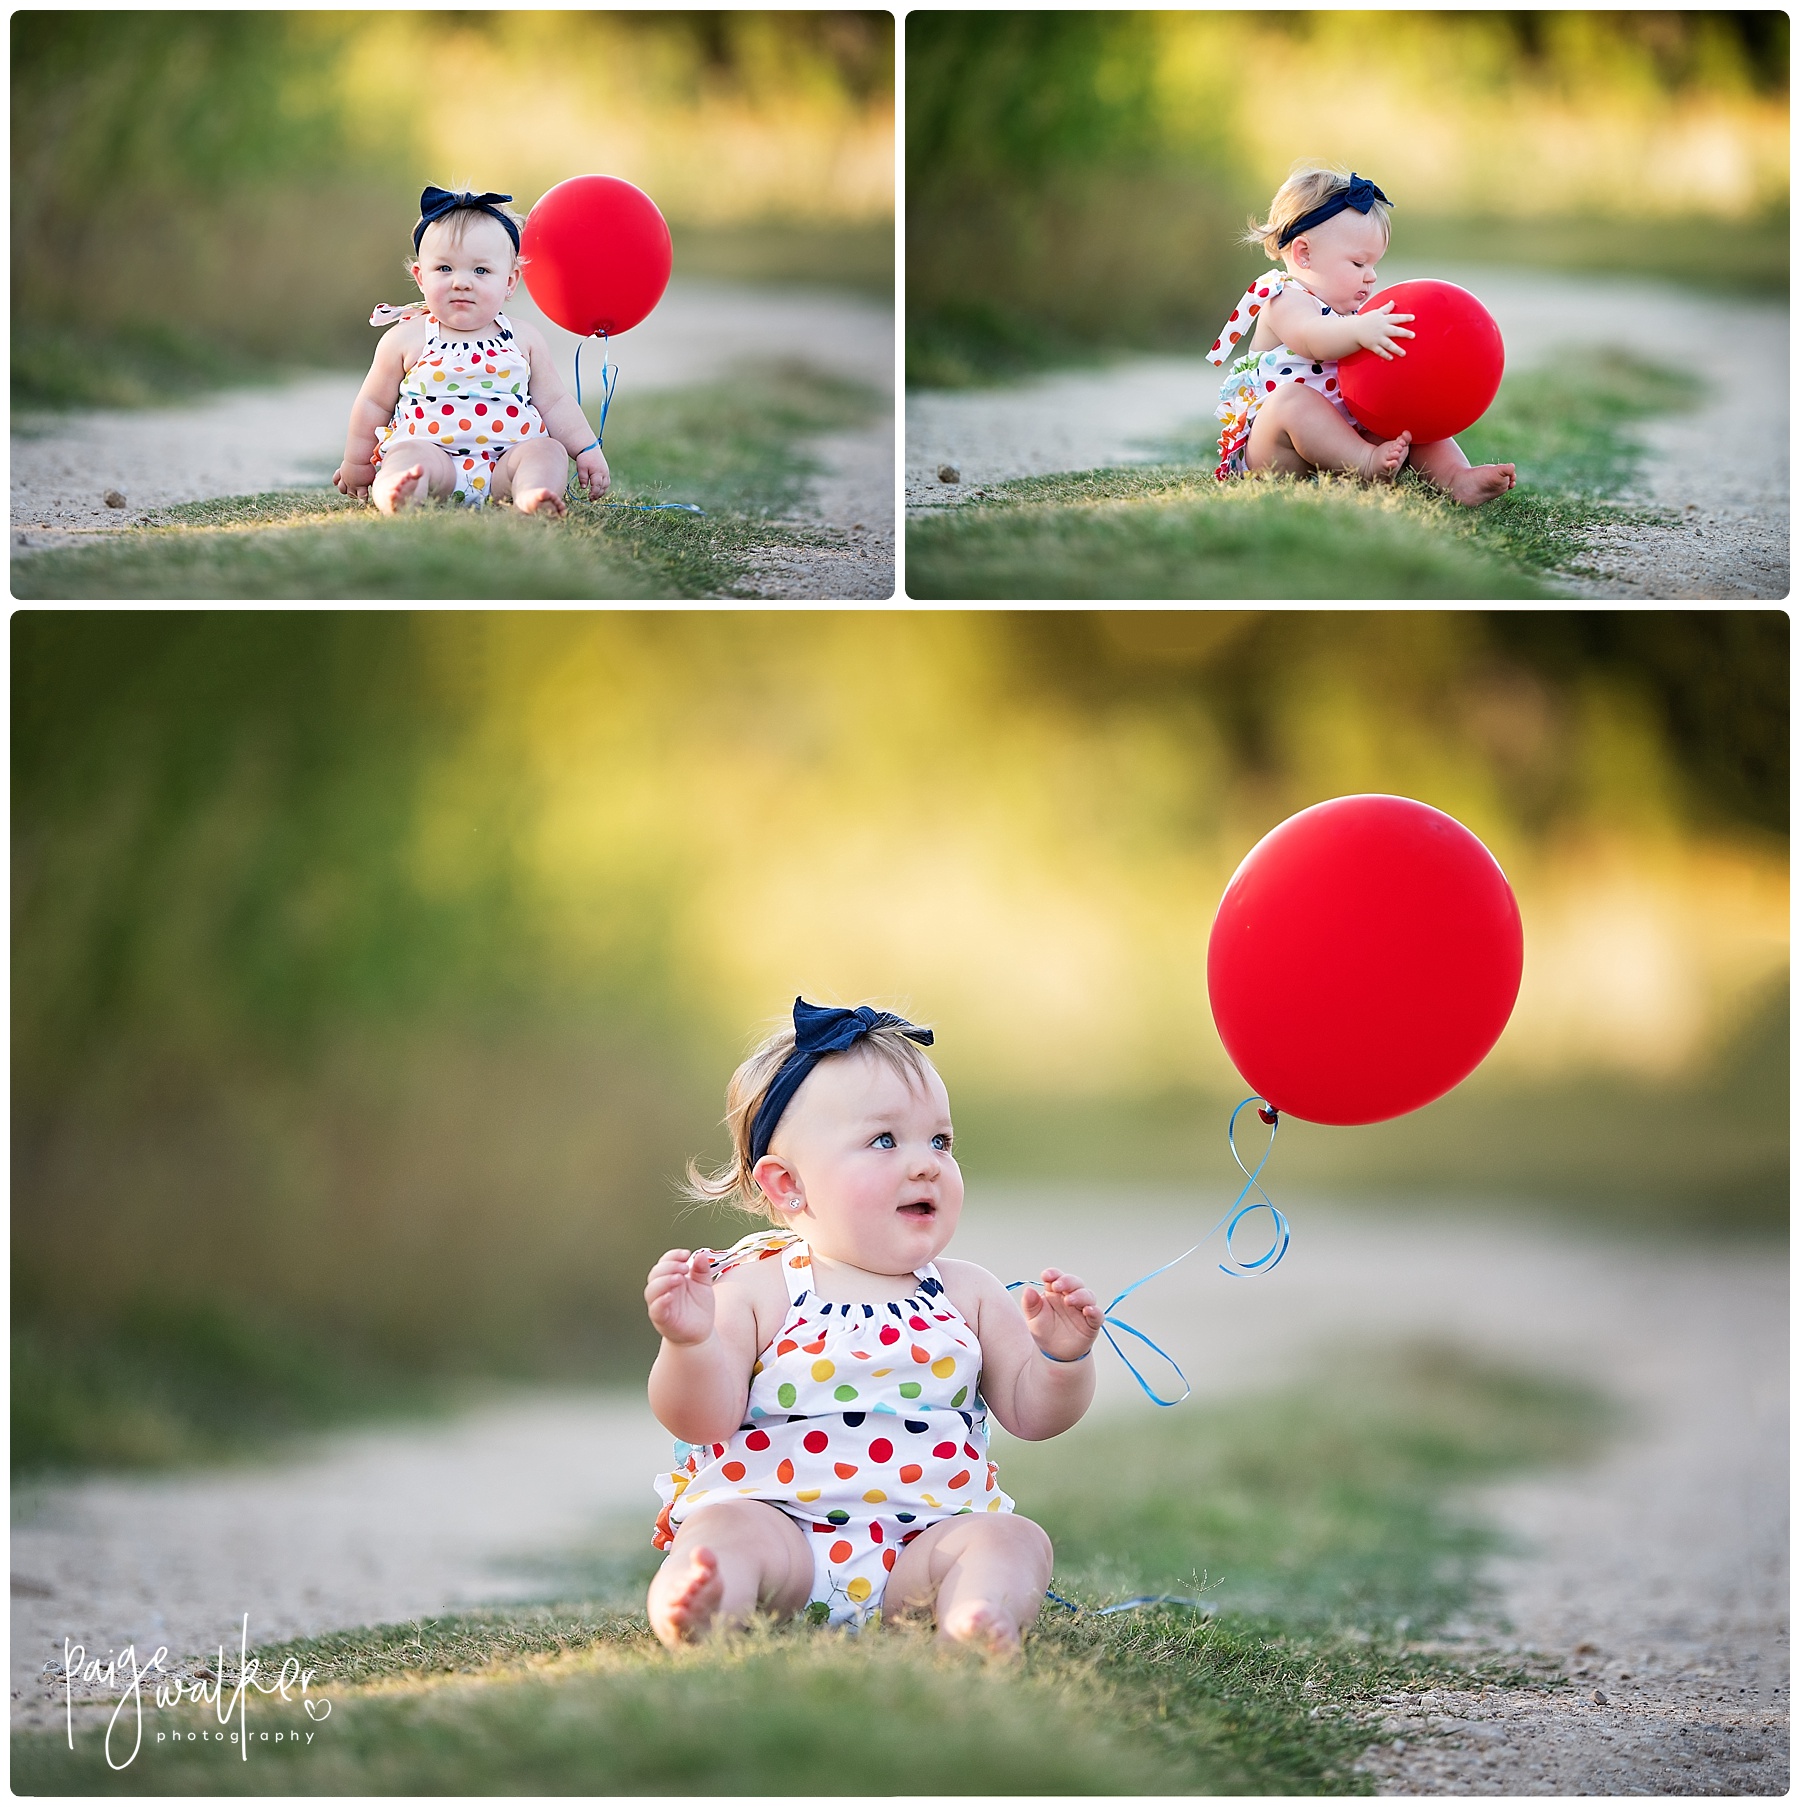 one year old with her one red balloon